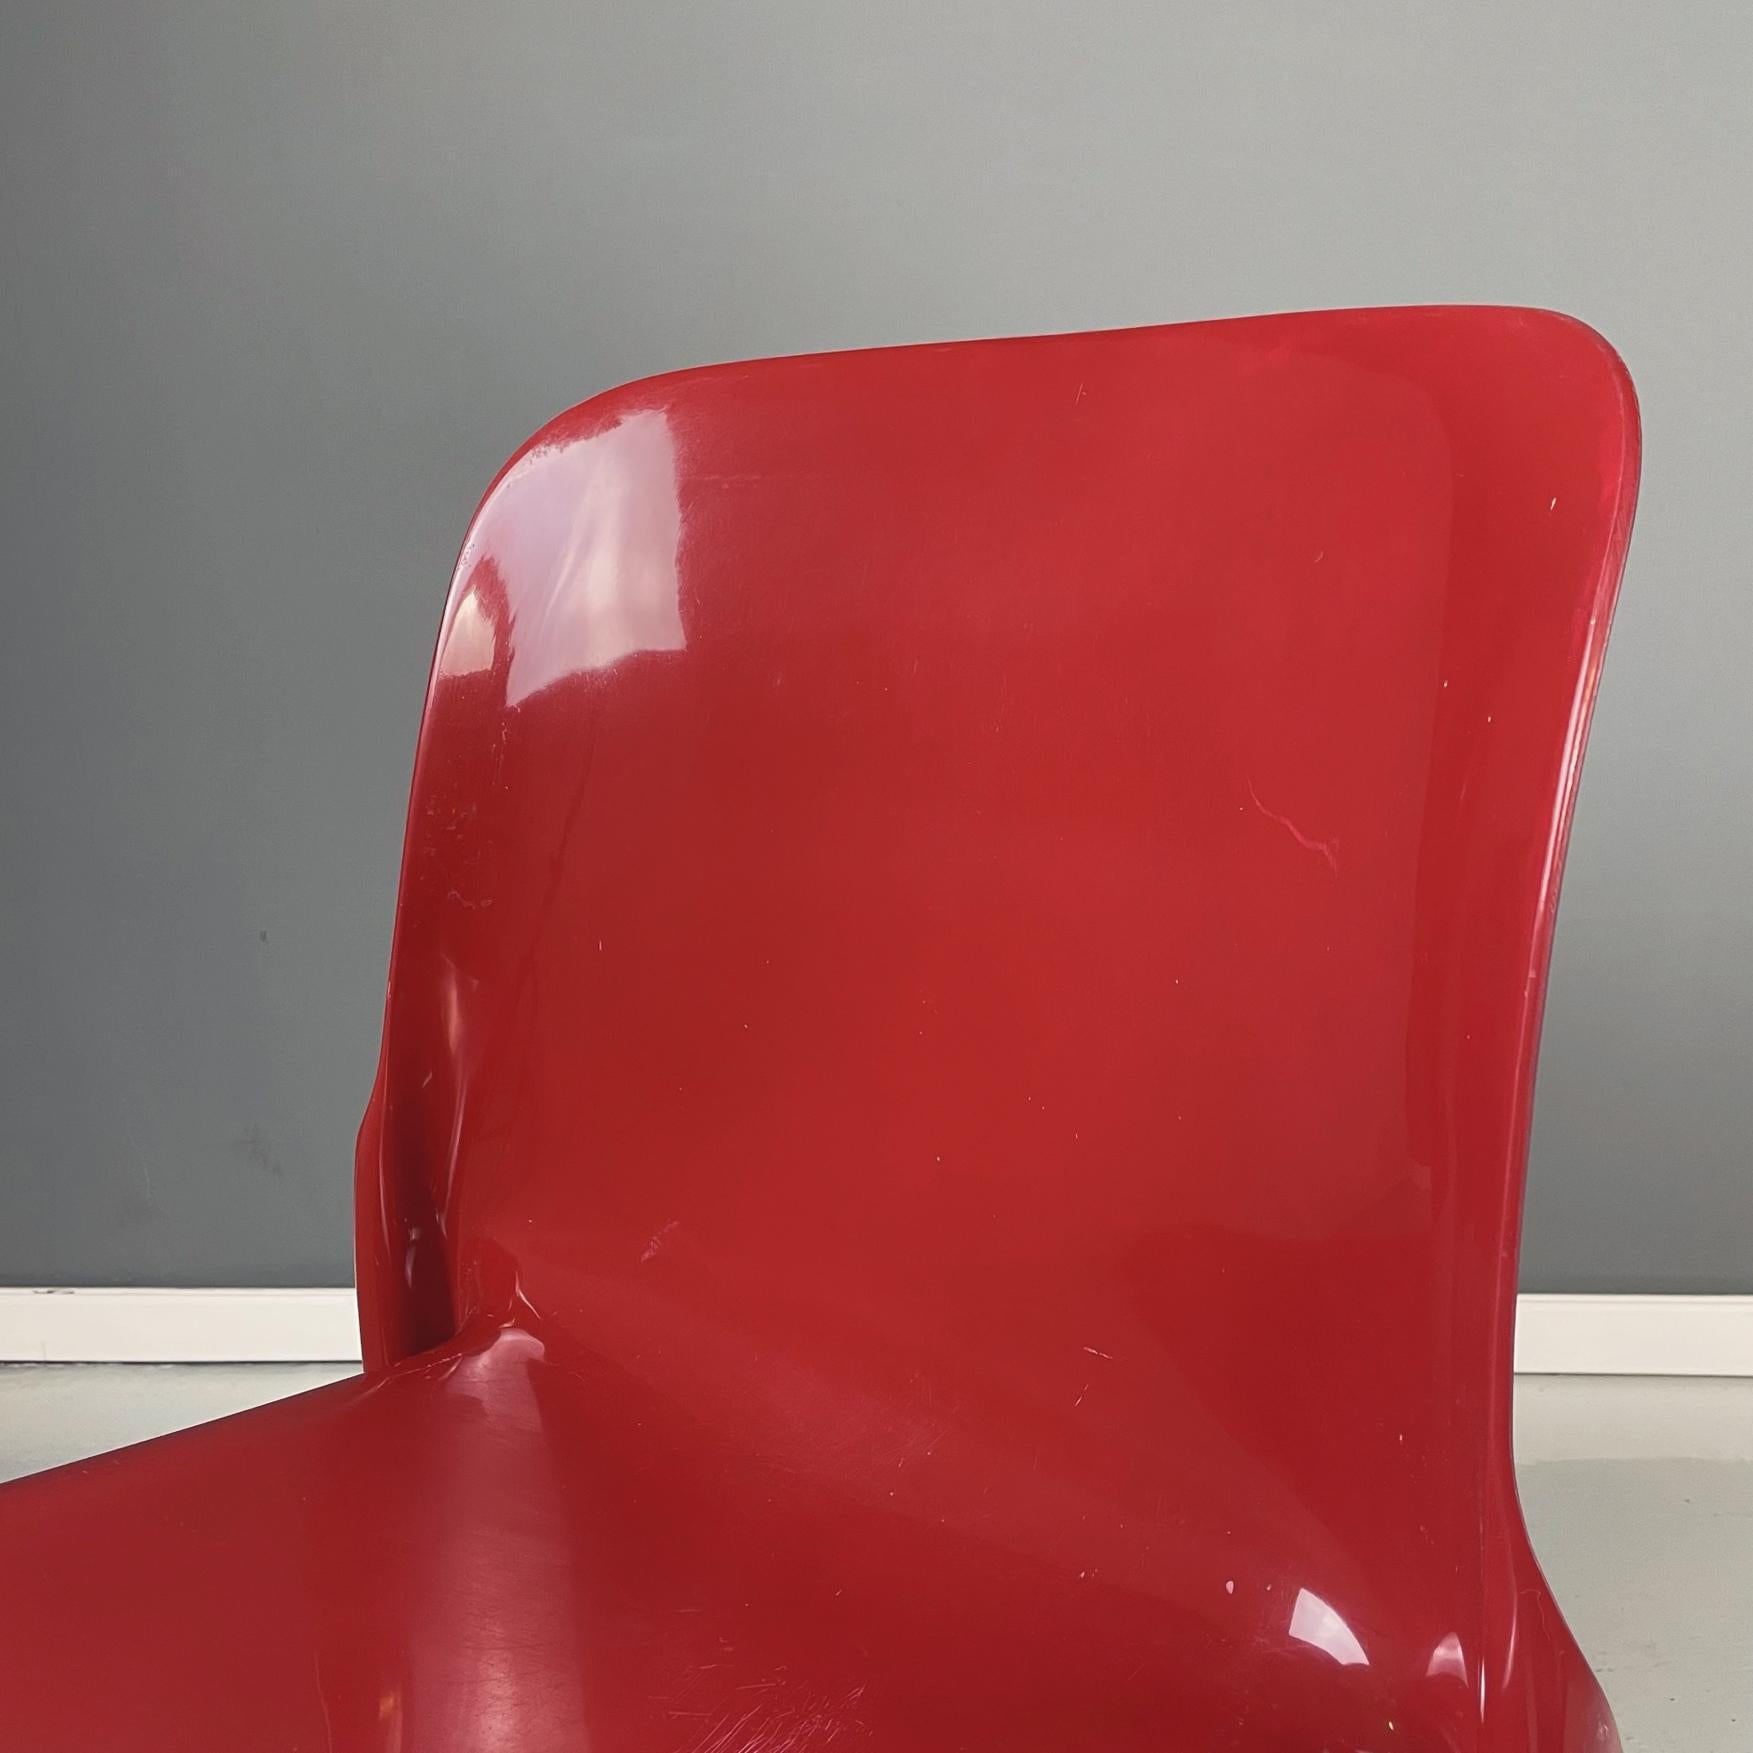 Mid-20th Century Italian modern plastic red Chairs Selene by Vico Magistretti for Artemide, 1960s For Sale